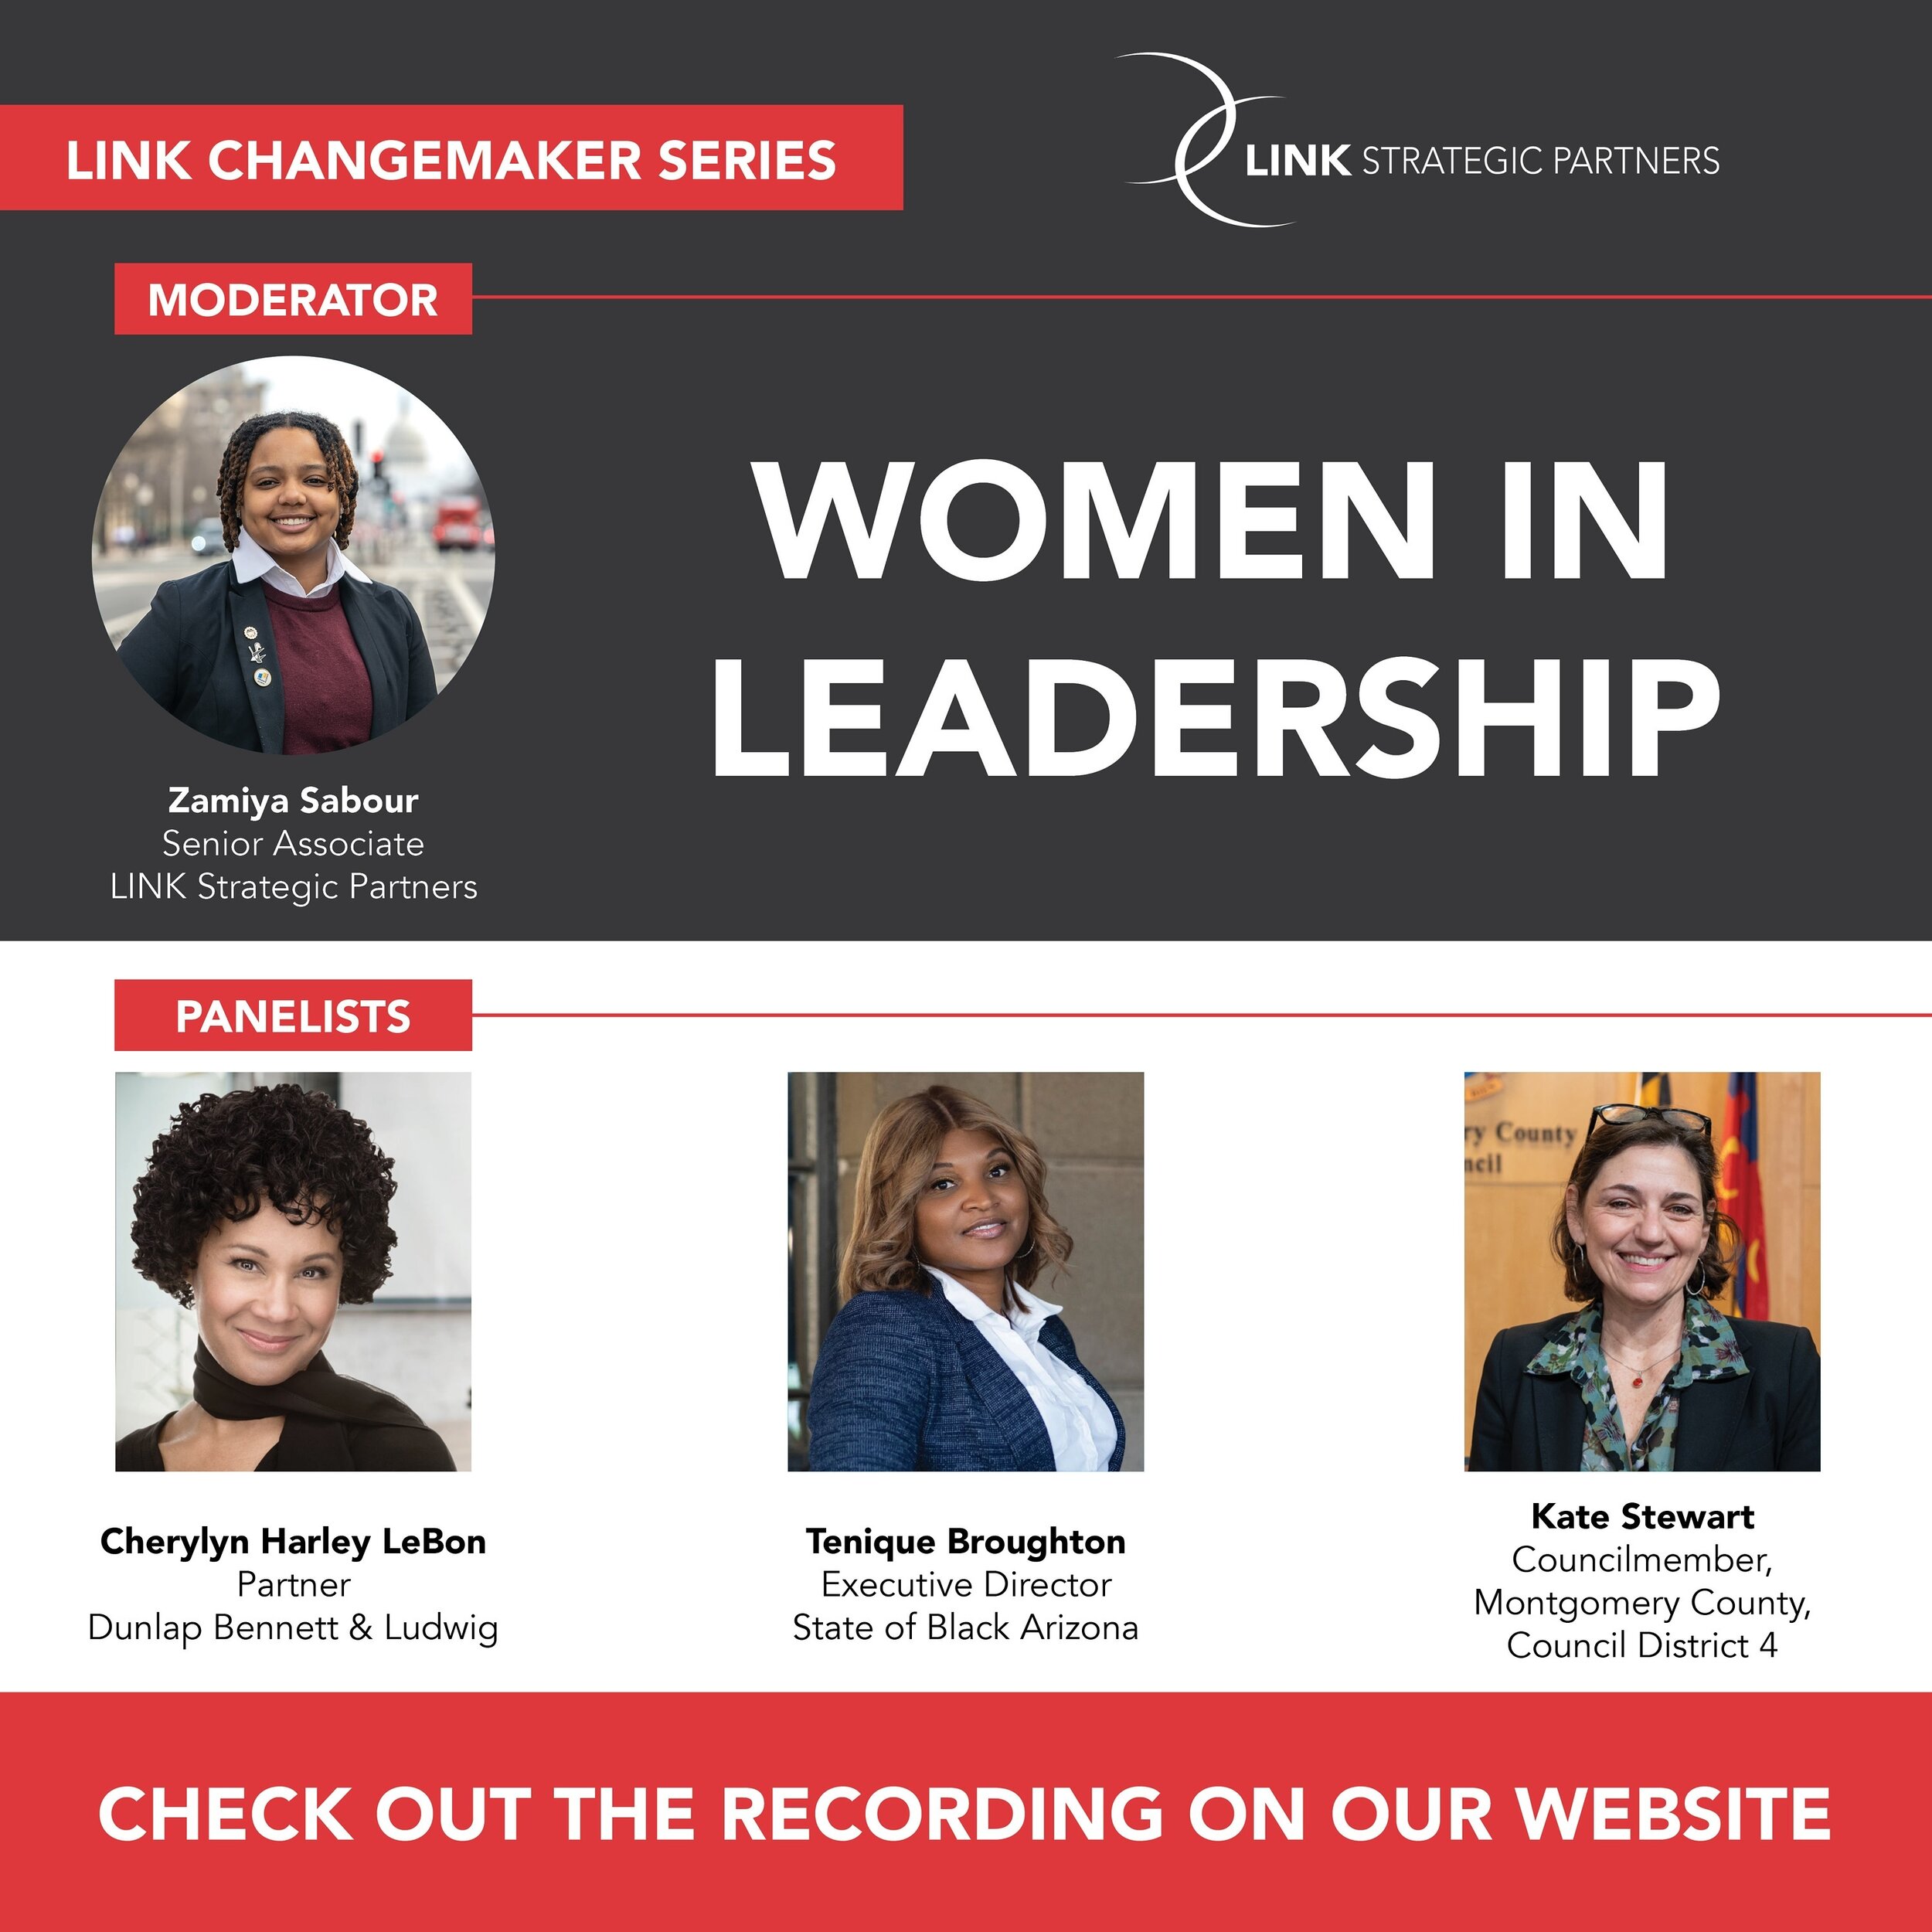 #FBF to this past November&rsquo;s Women in Leadership #LINKChangemaker panel featuring @harleylebon , @teniquab, and @cmkatestewart! Access this uplifting panel featuring women leaders across a variety of sectors, and all previous LINK Changemaker p